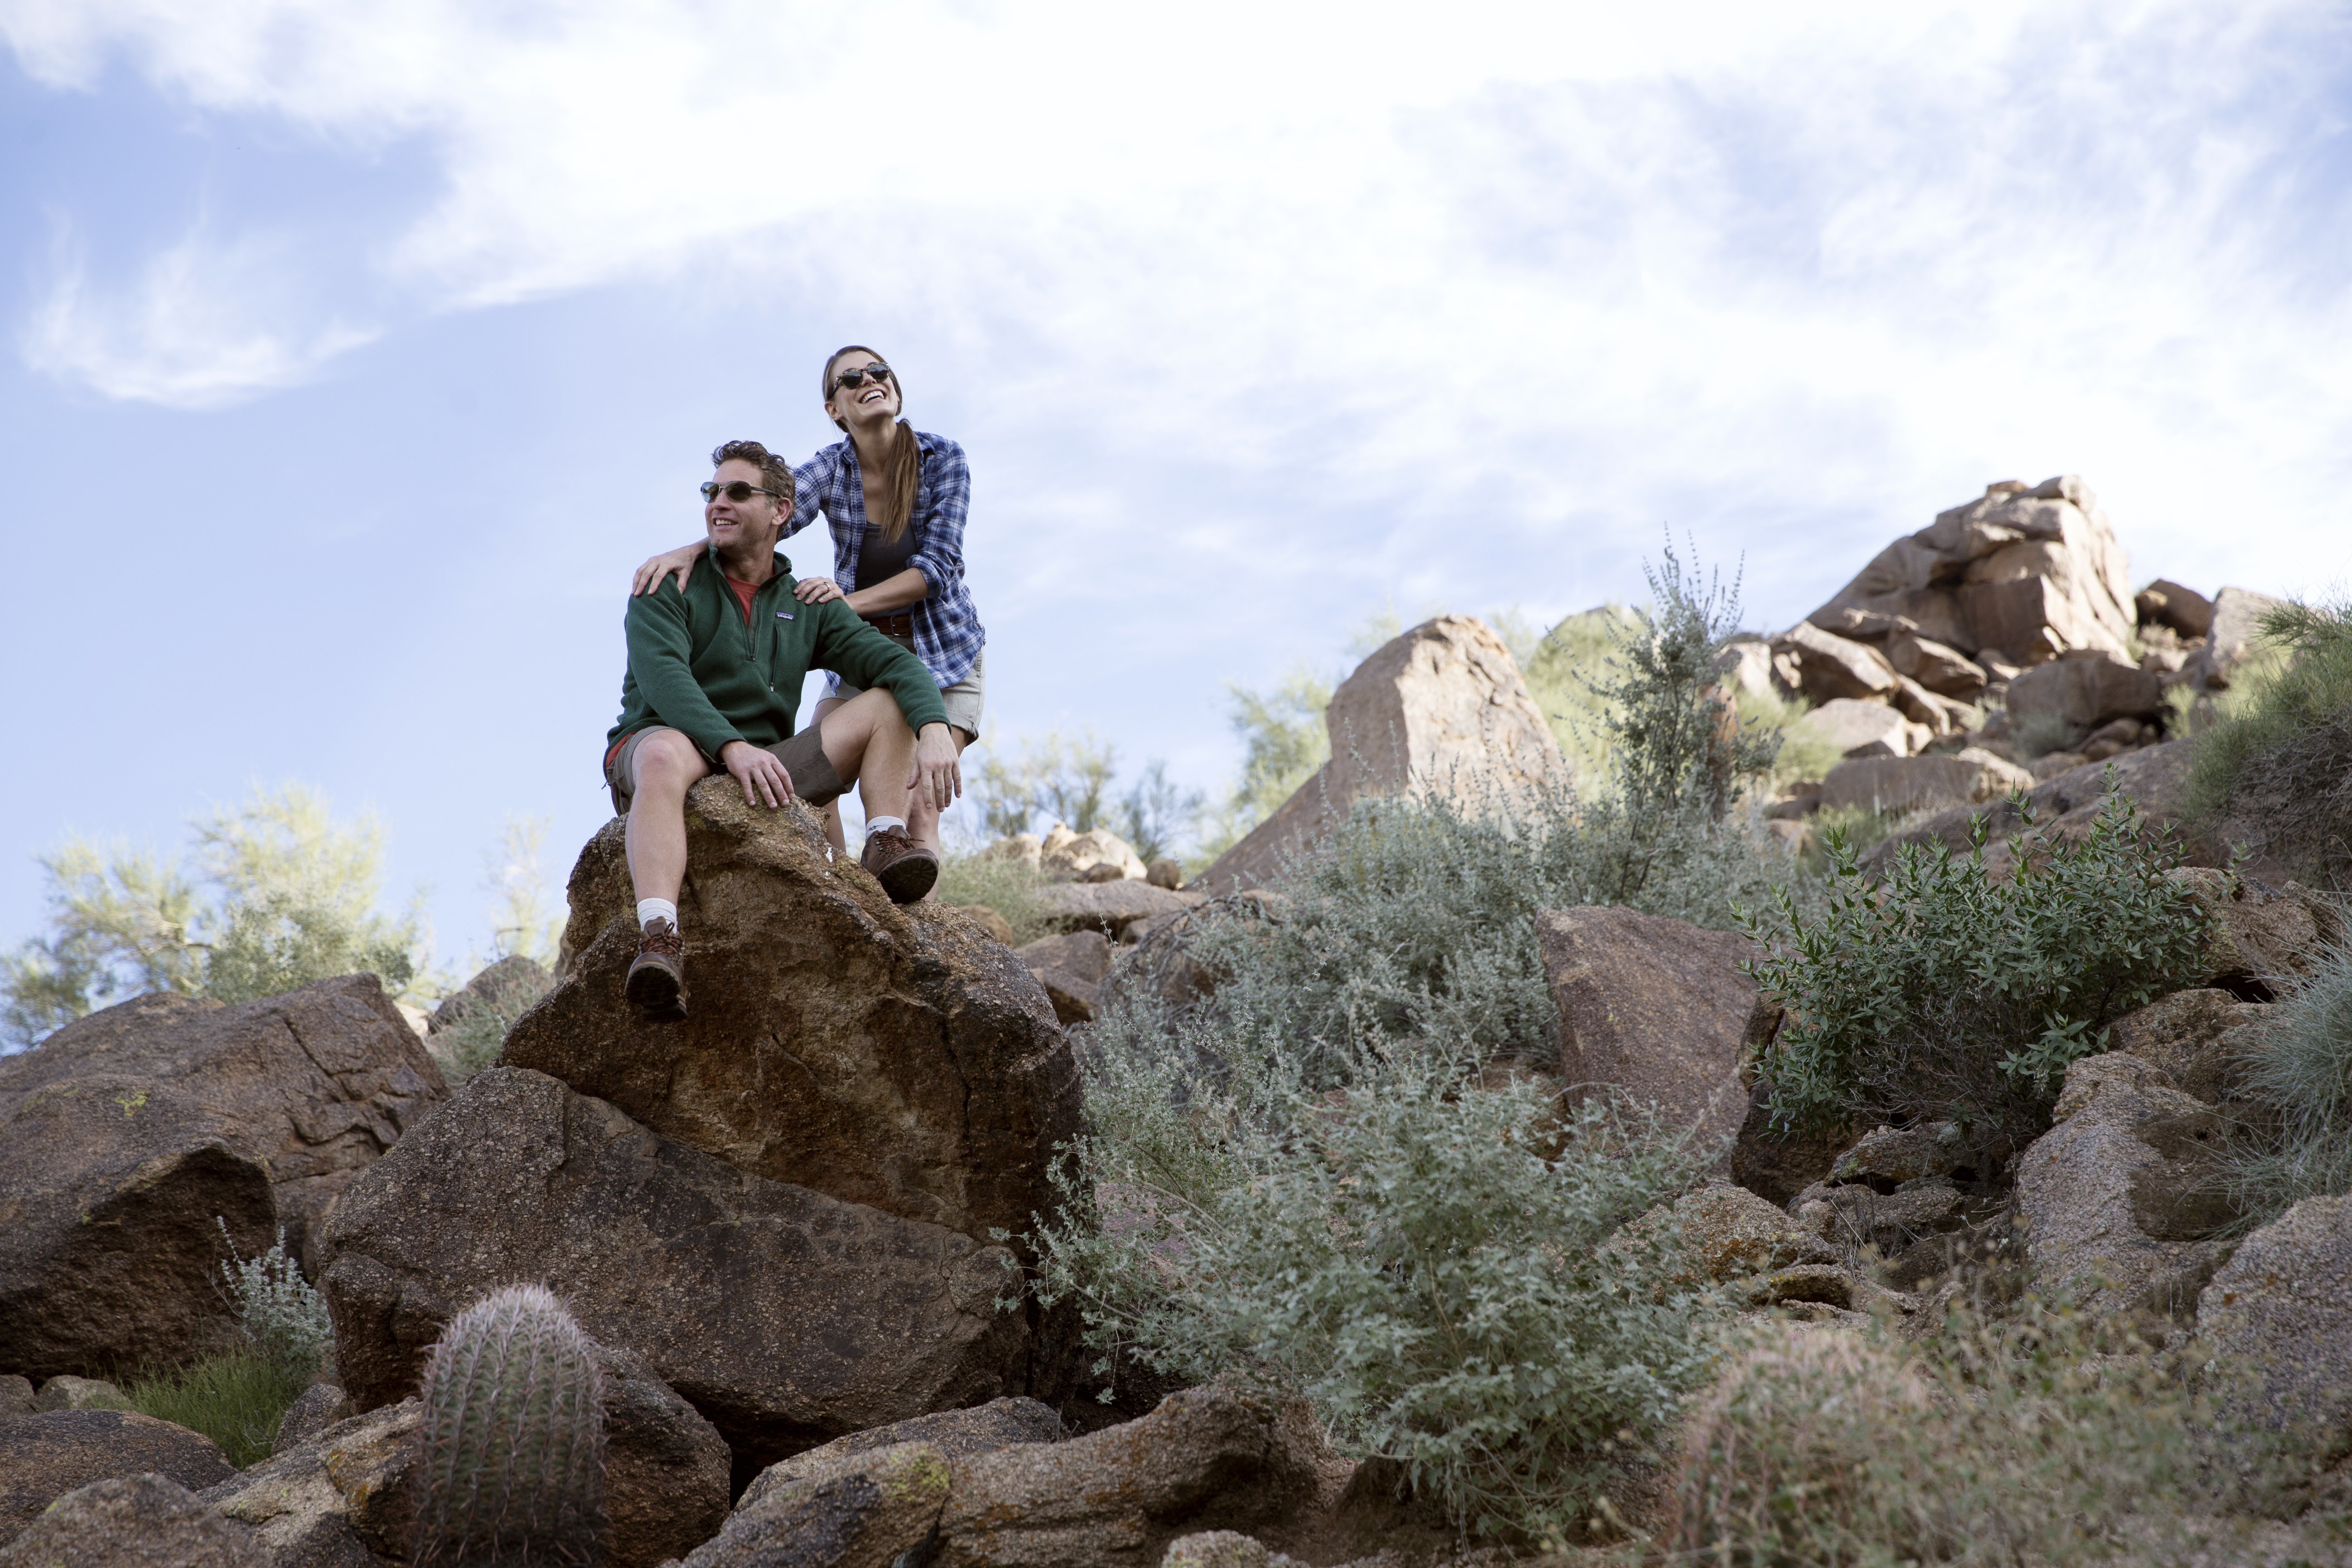 A couple takes a rest while hiking over boulders